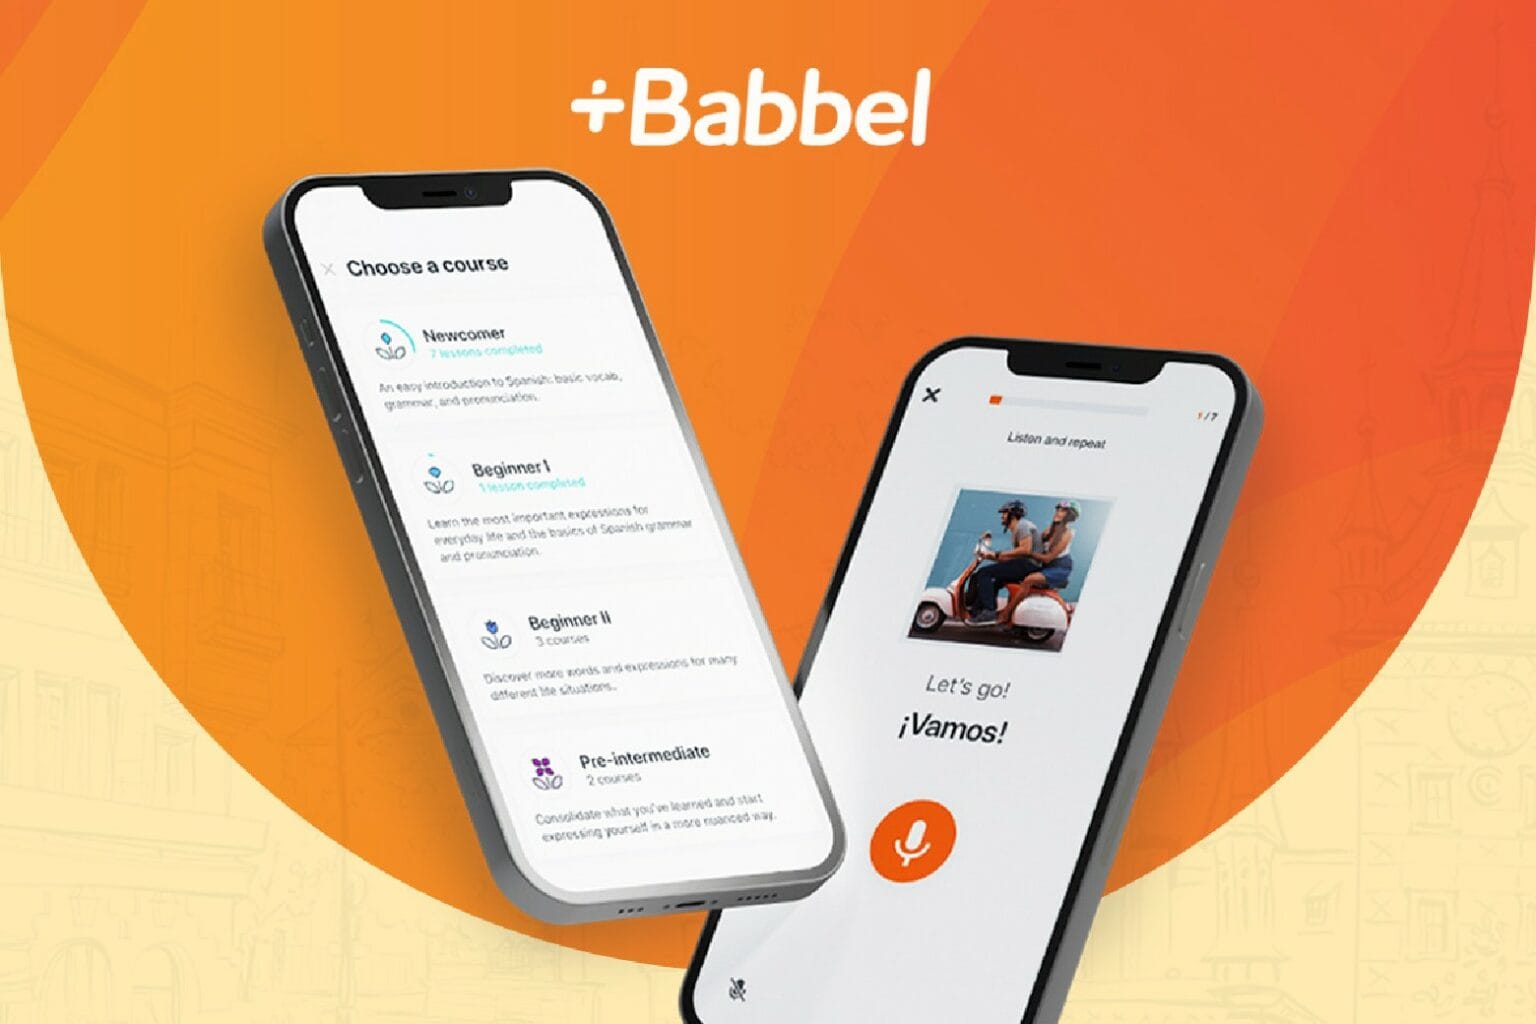 Speak a second language with Babbel, now $199.97 for life.